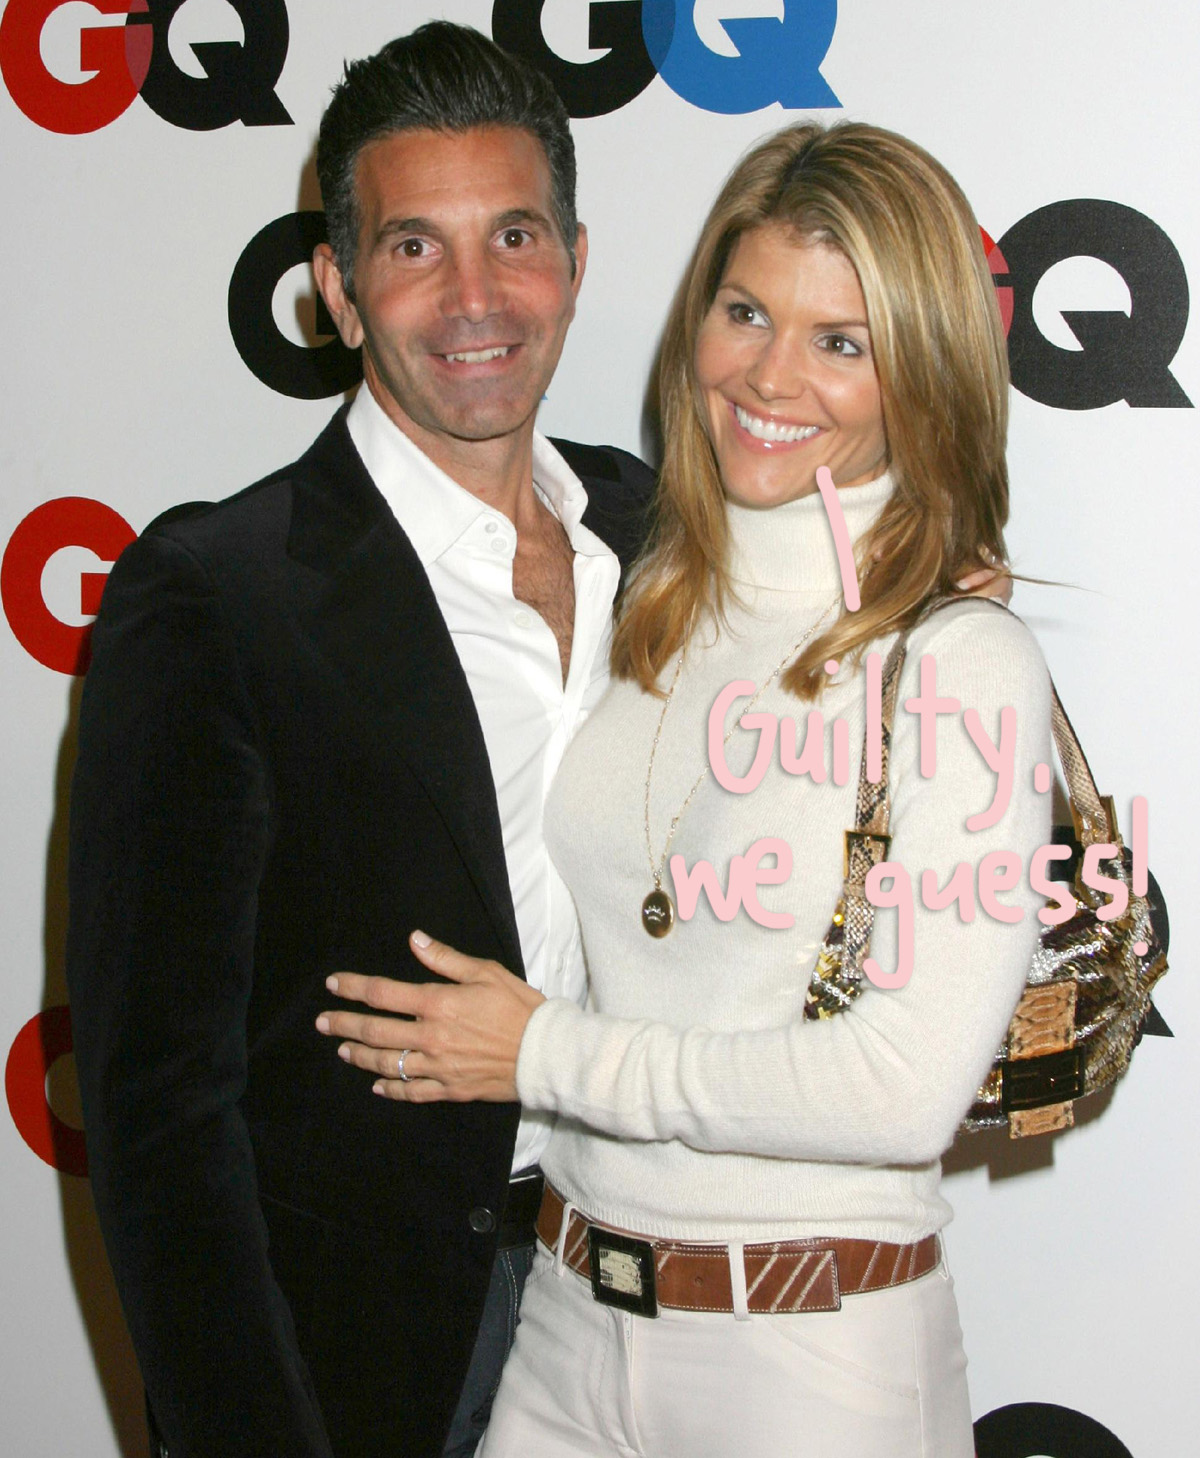 Lori Loughlin And Mossimo Giannulli Agree To Plead Guilty In College Admissions Scandal Details